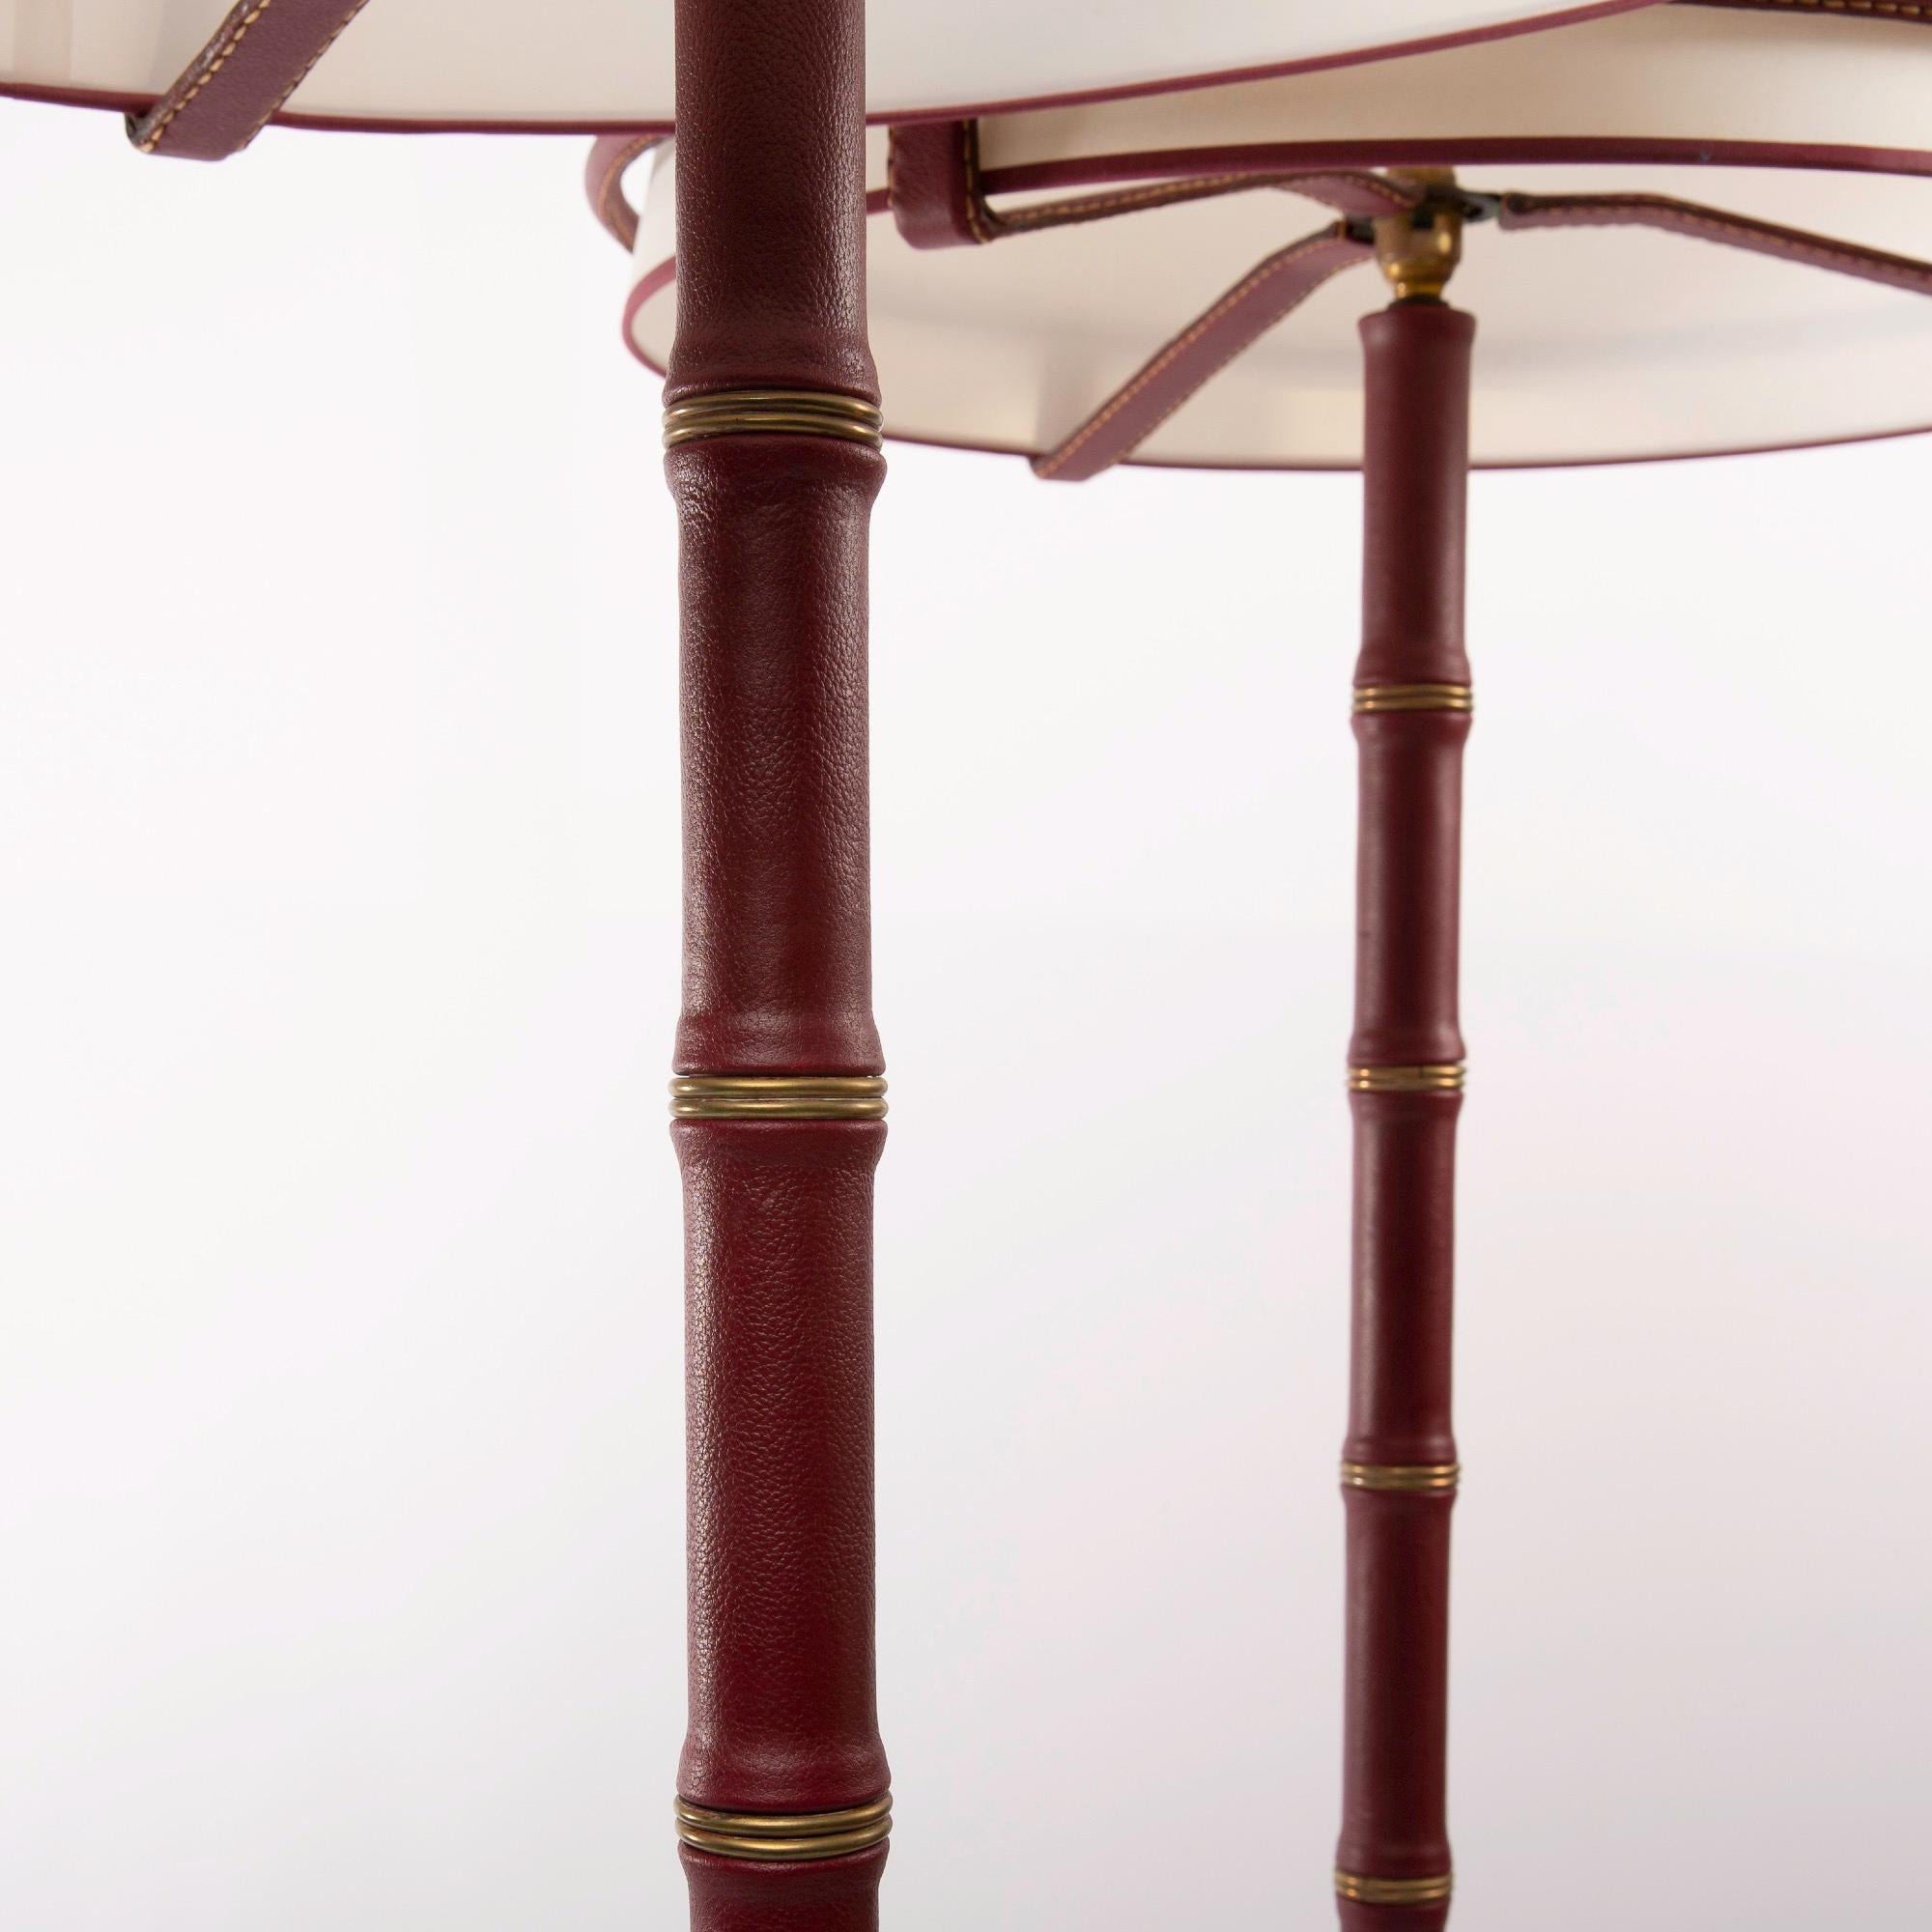 A fine pair of floor lamps designed by Jacques Adnet and manufactured by Compagnie des Arts Français.
The structure of theses lamps are made of steel and covered with saddle stitched burgundy leather.
The lampshades are simply placed on the